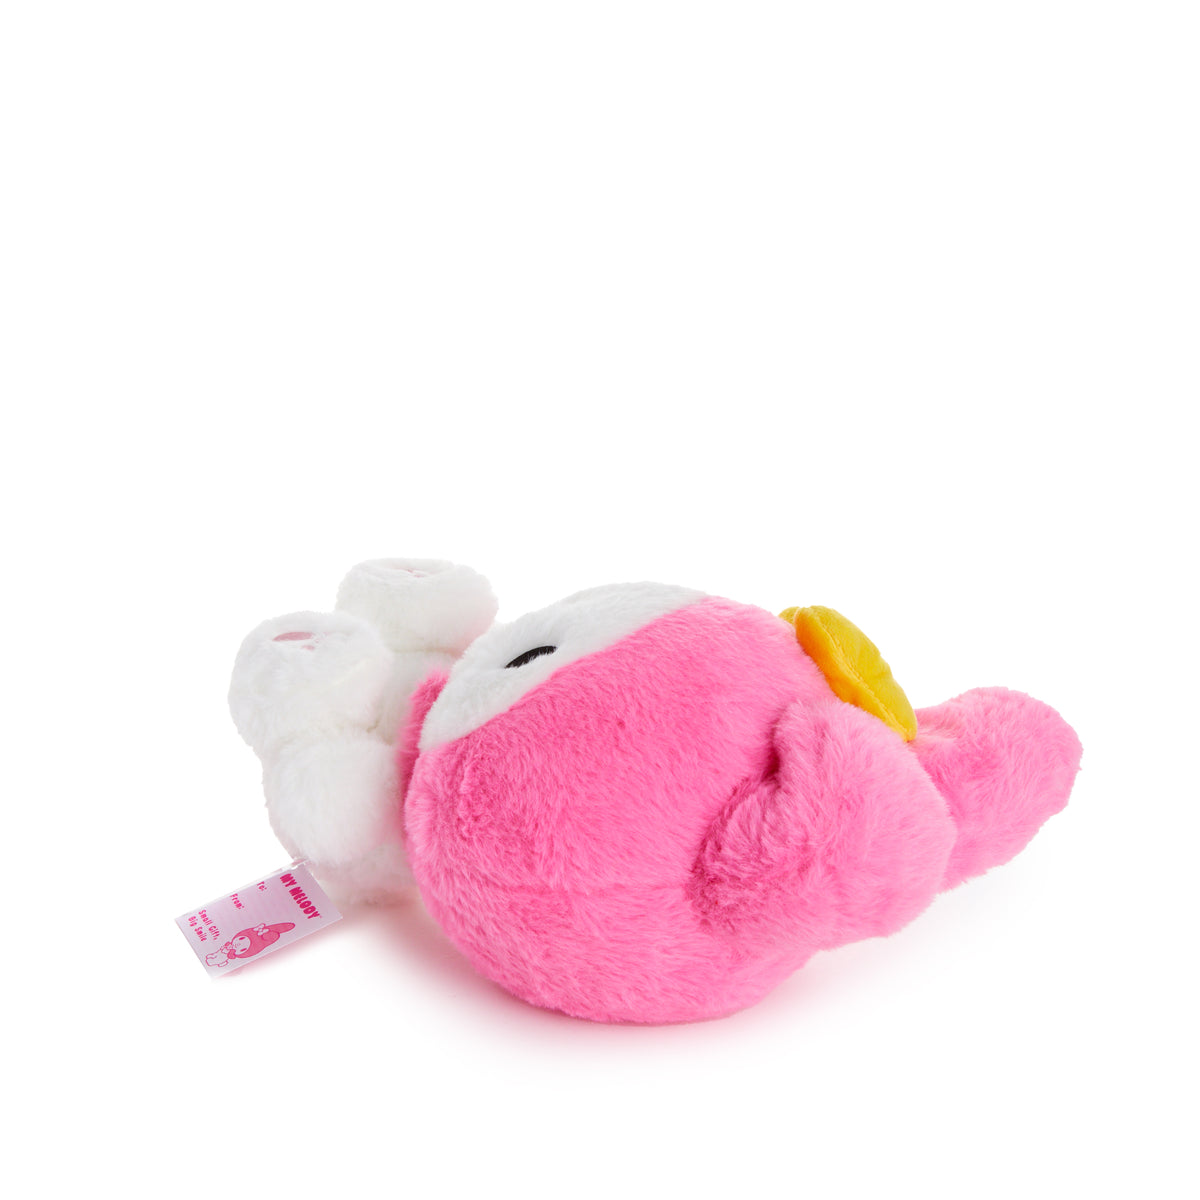 My Melody Authentic Sanrio Cute Soft Plush Jumbo Doll. Collectible